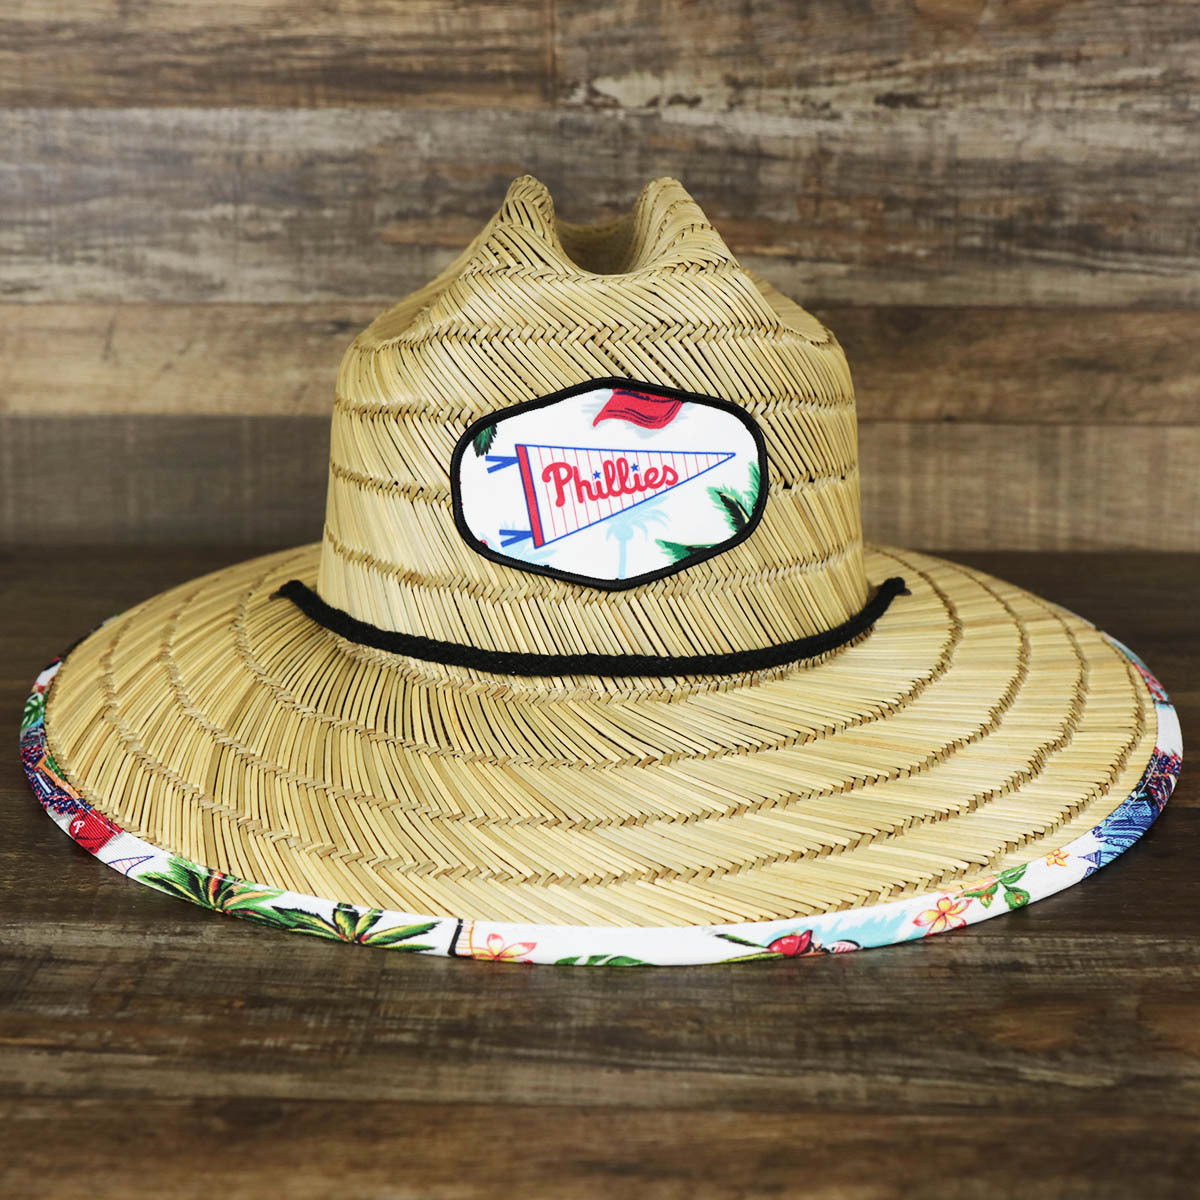 The front of the Philadephia Phillies Straw Life Guard Hat Reyn Spooner